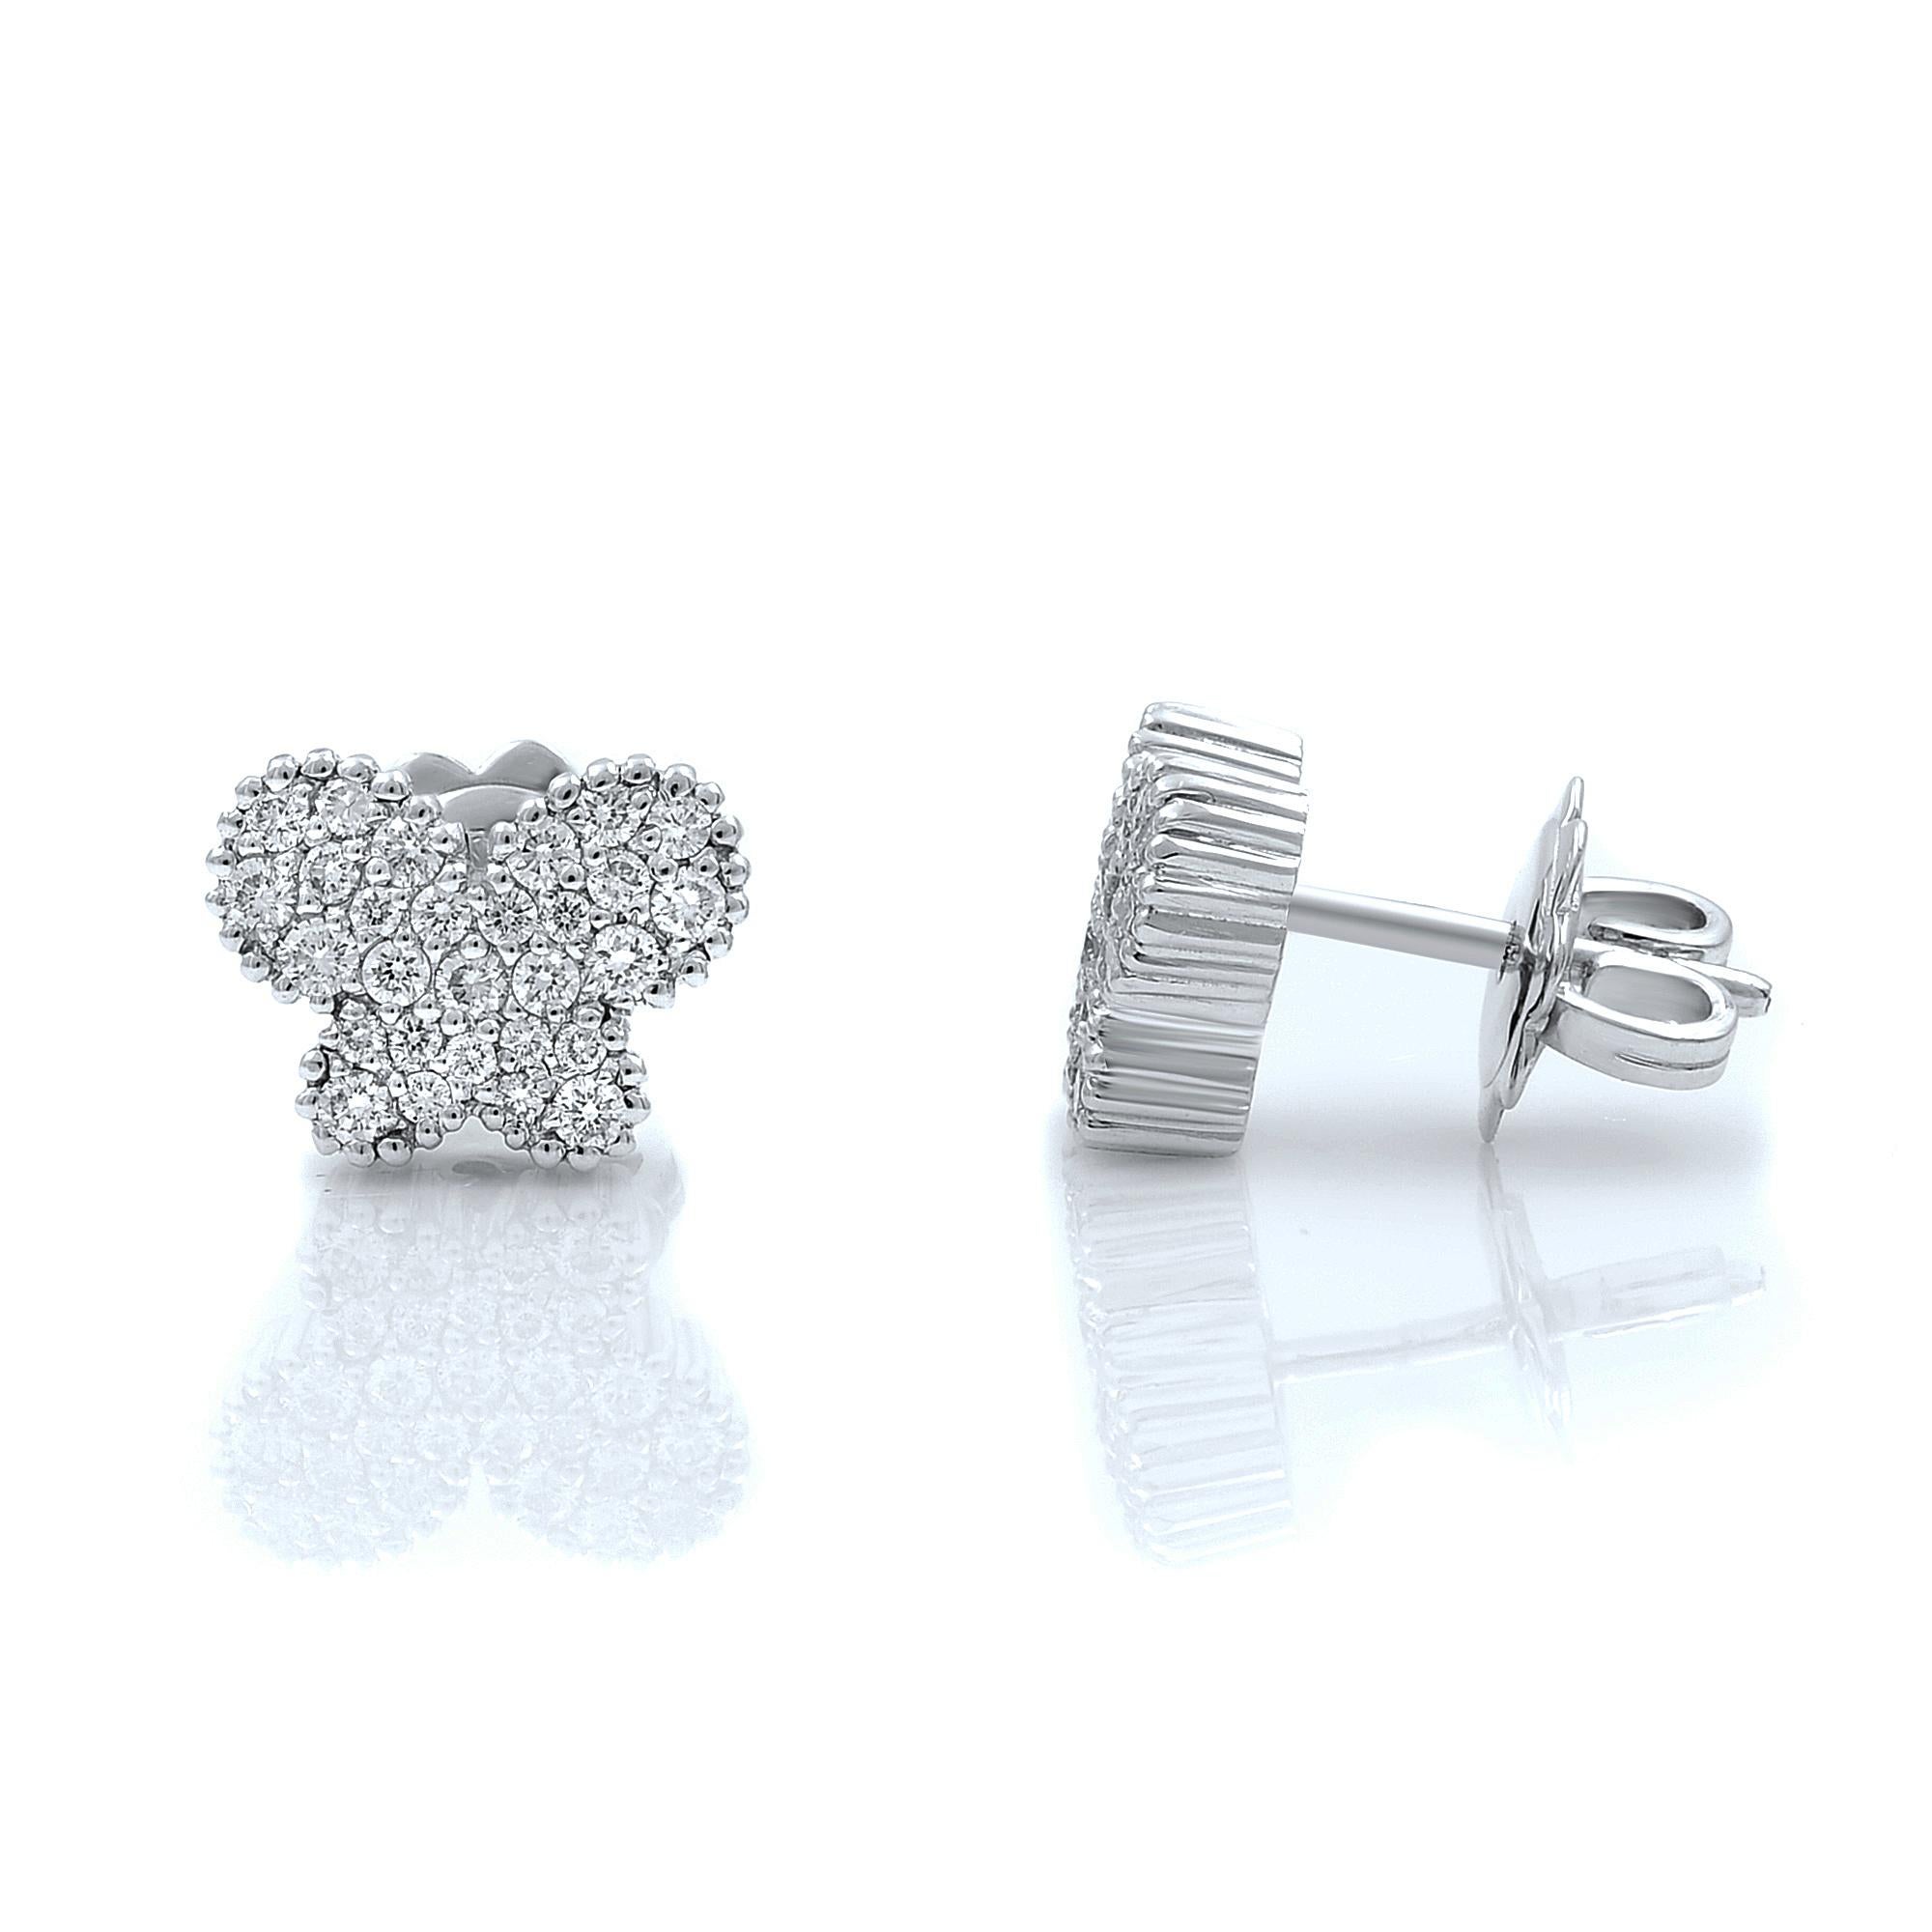 Beautiful modern 18k white gold, butterflies diamond stud earrings with butterfly clasp. Shiny finish. Total carat weight: 0.48cts of round cut diamonds. These brilliantly winged butterfly diamond earrings sure to make your heart flutter.